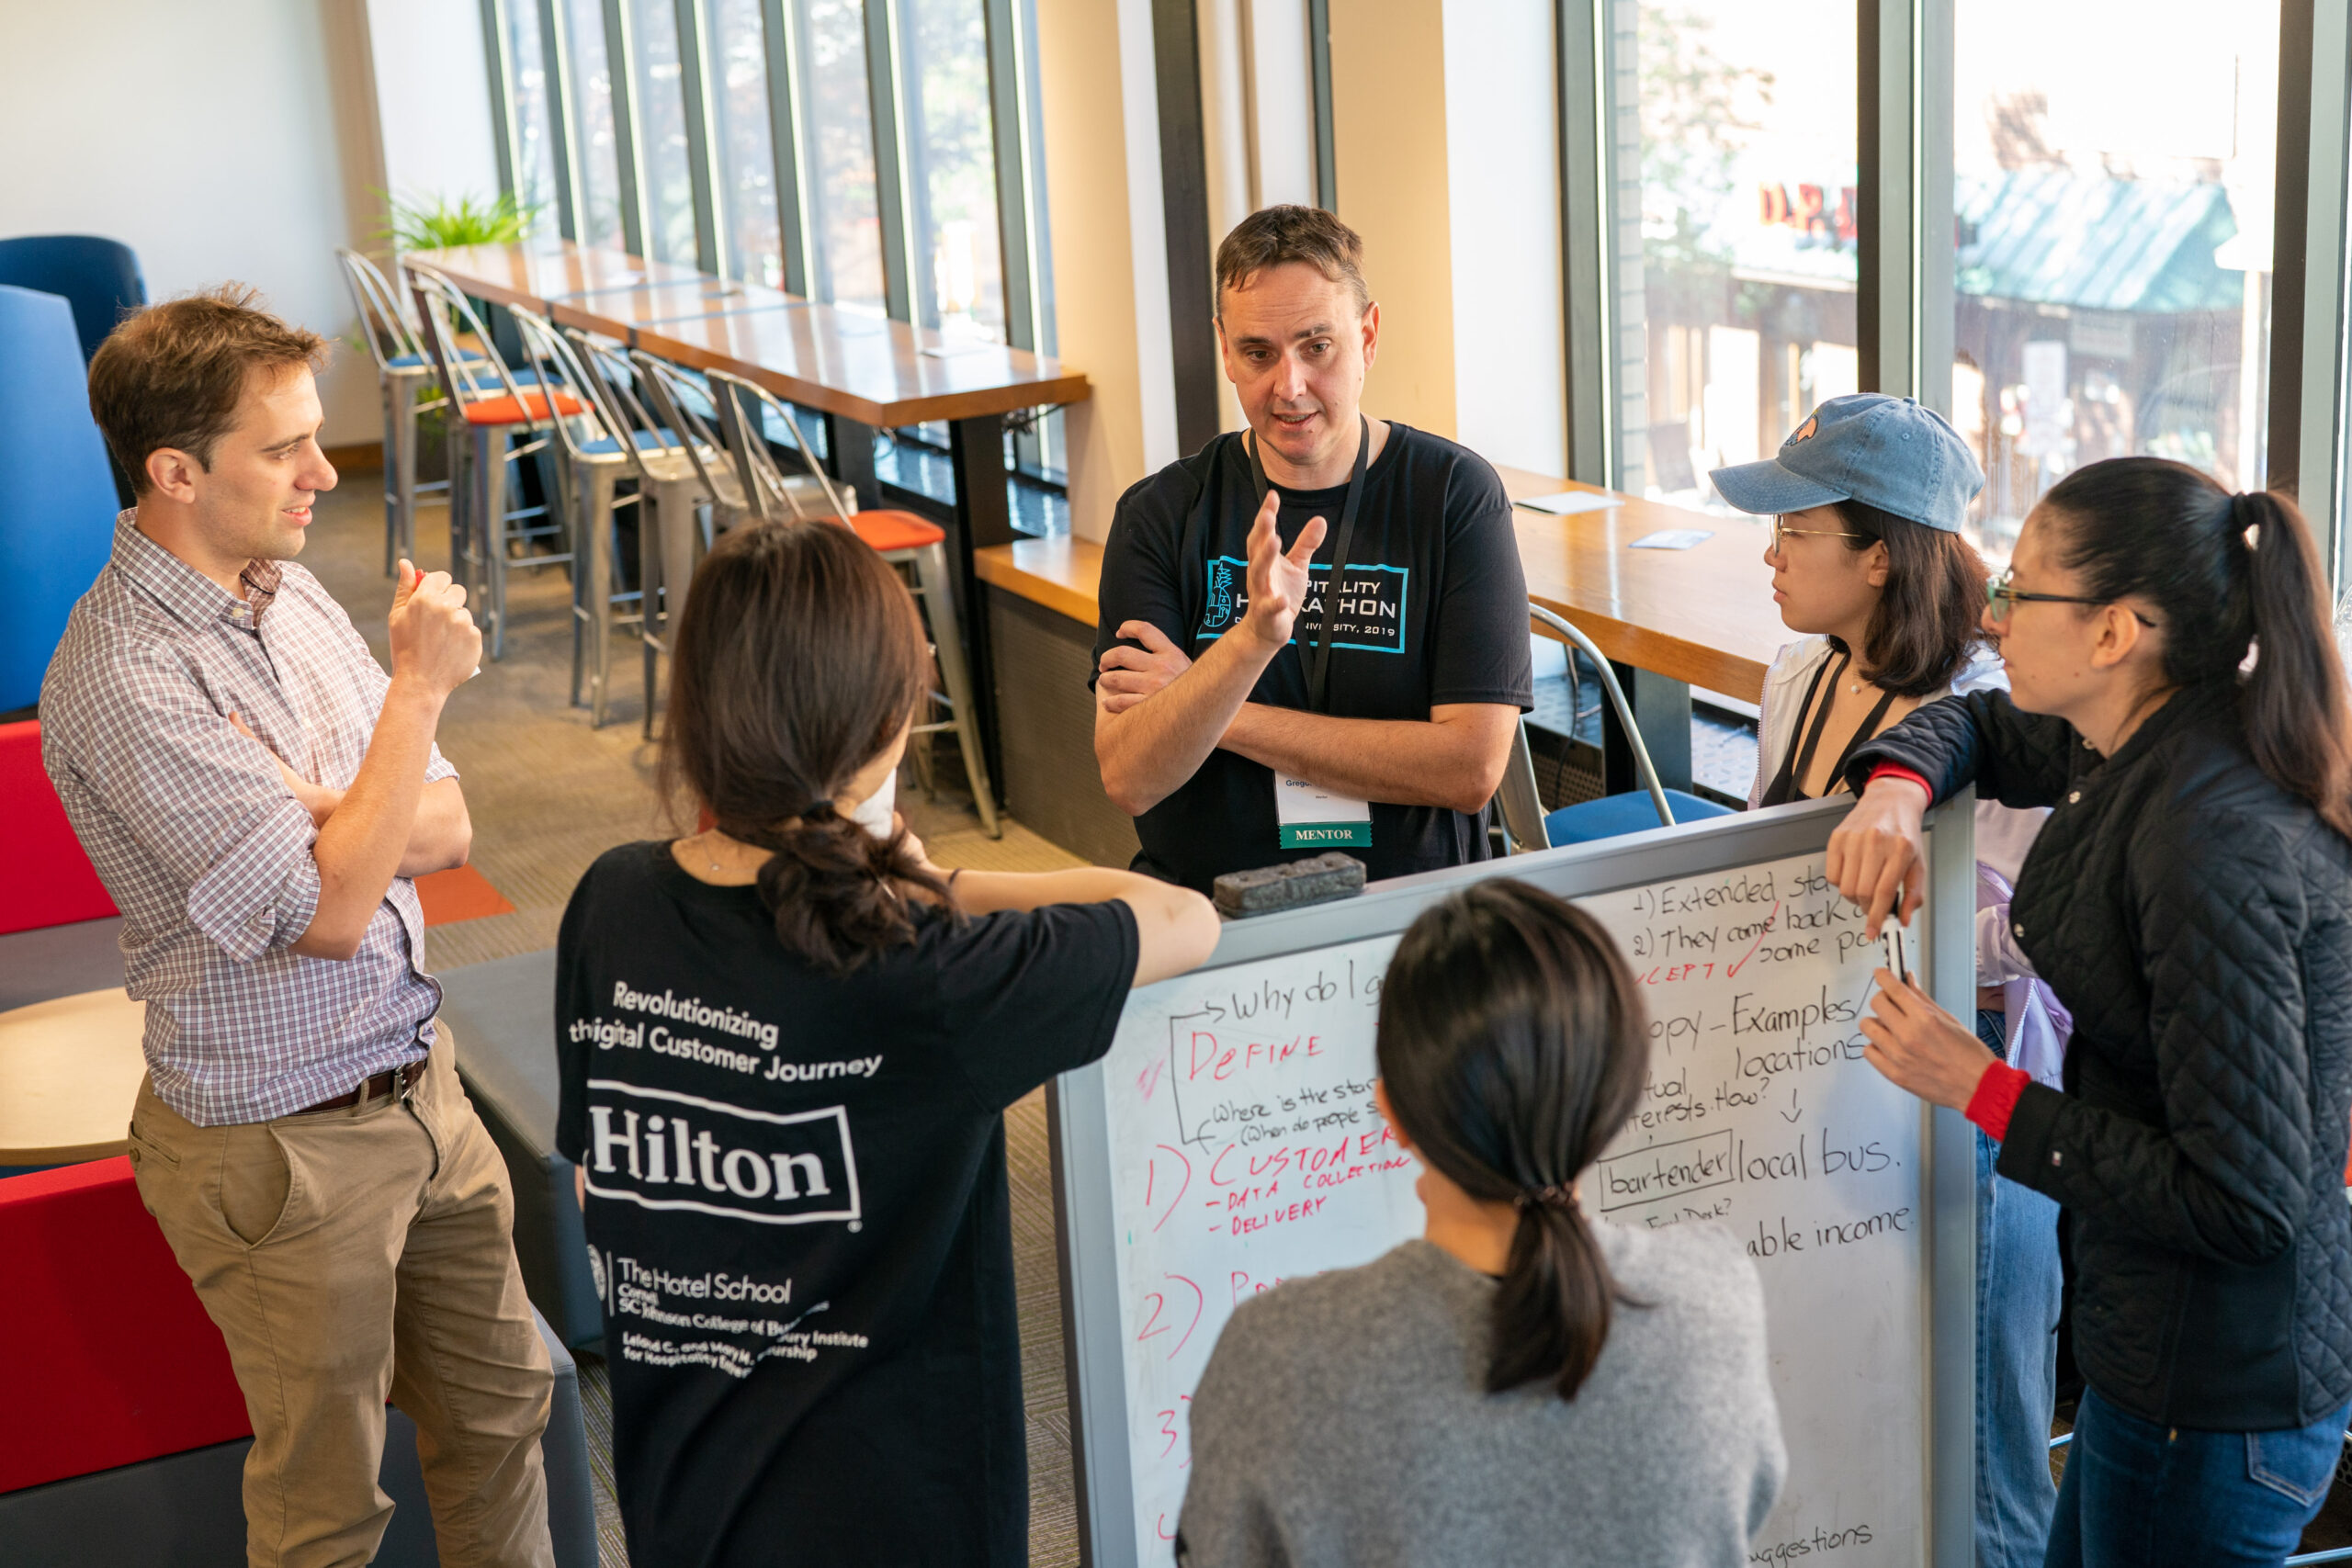 Robert Gregor chats with students at the Hilton Hospitality Hackathon, Leland C. and Mary M. Pillsbury Institute for Hospitality Entrepreneurship, Cornell University.